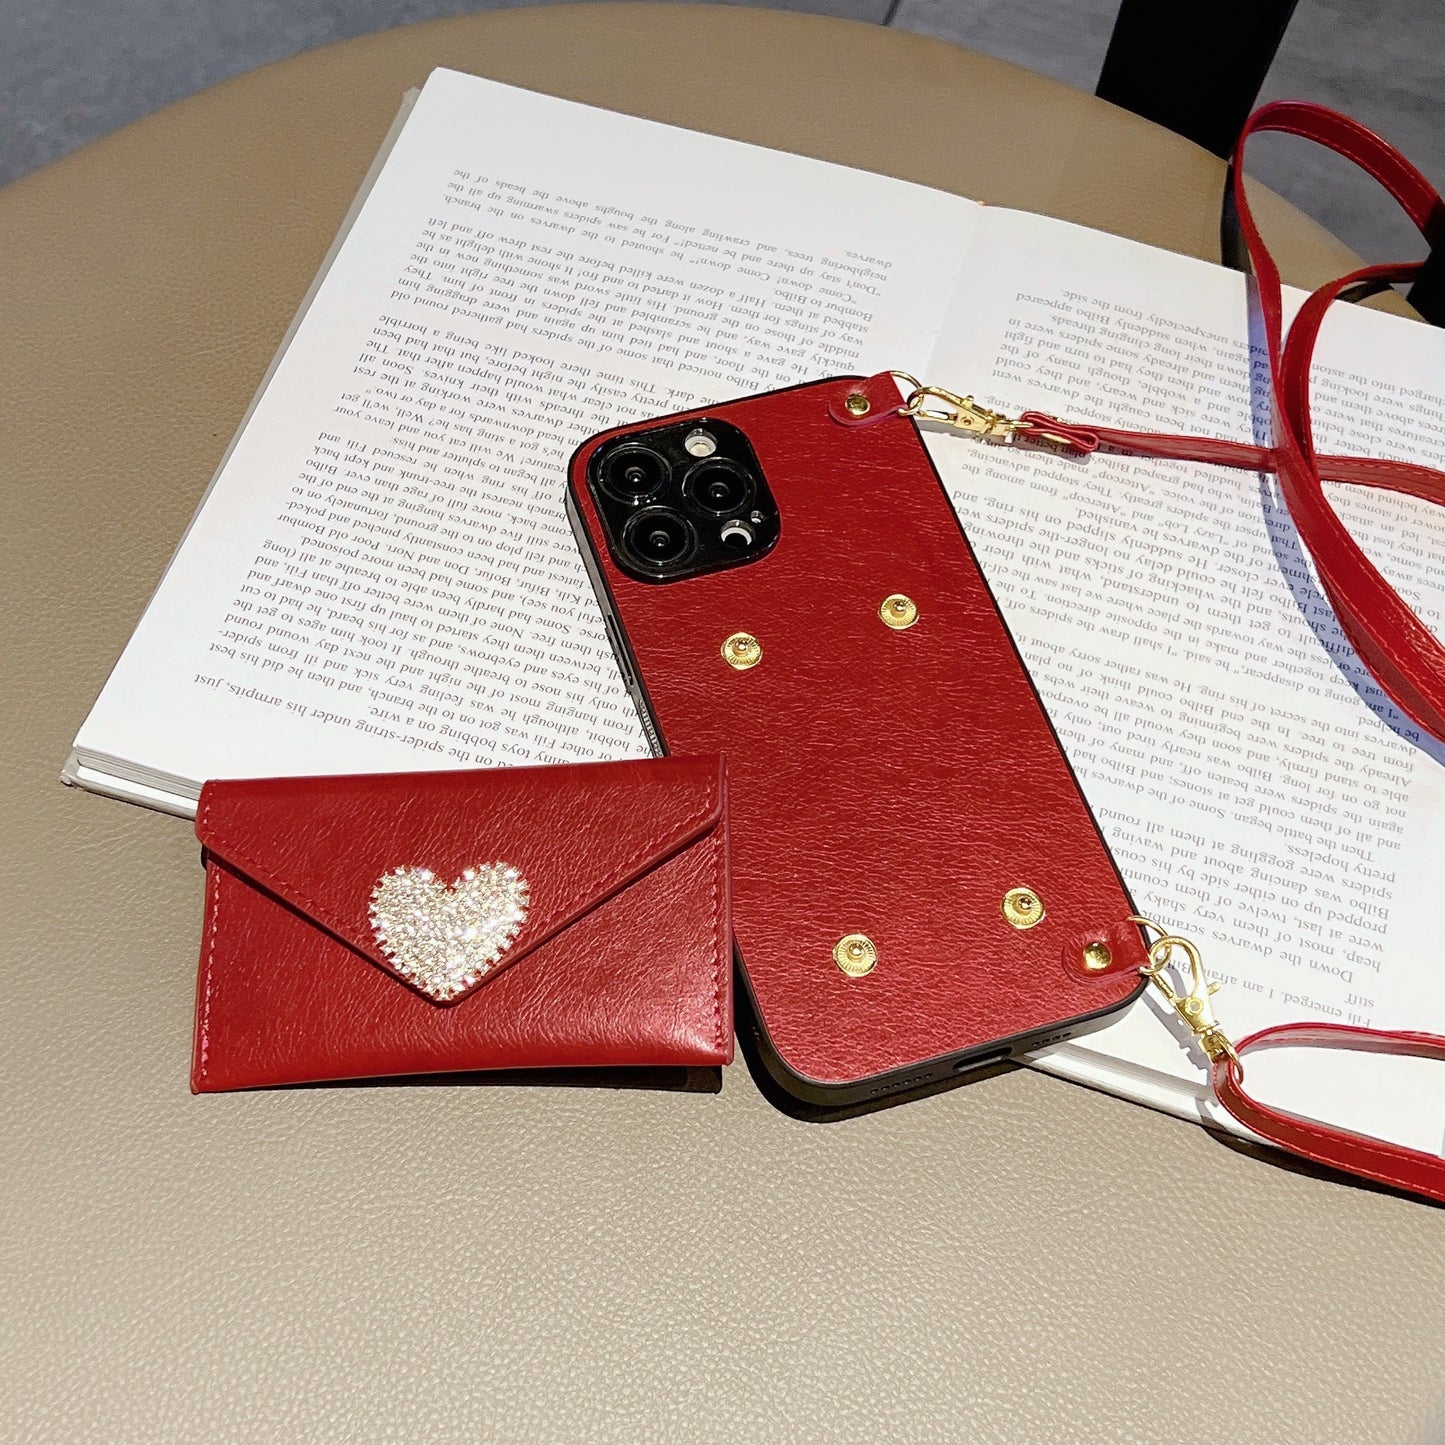 Oriseeasy Pu Cute iPhone Case Wallet with Bling Heart Stone